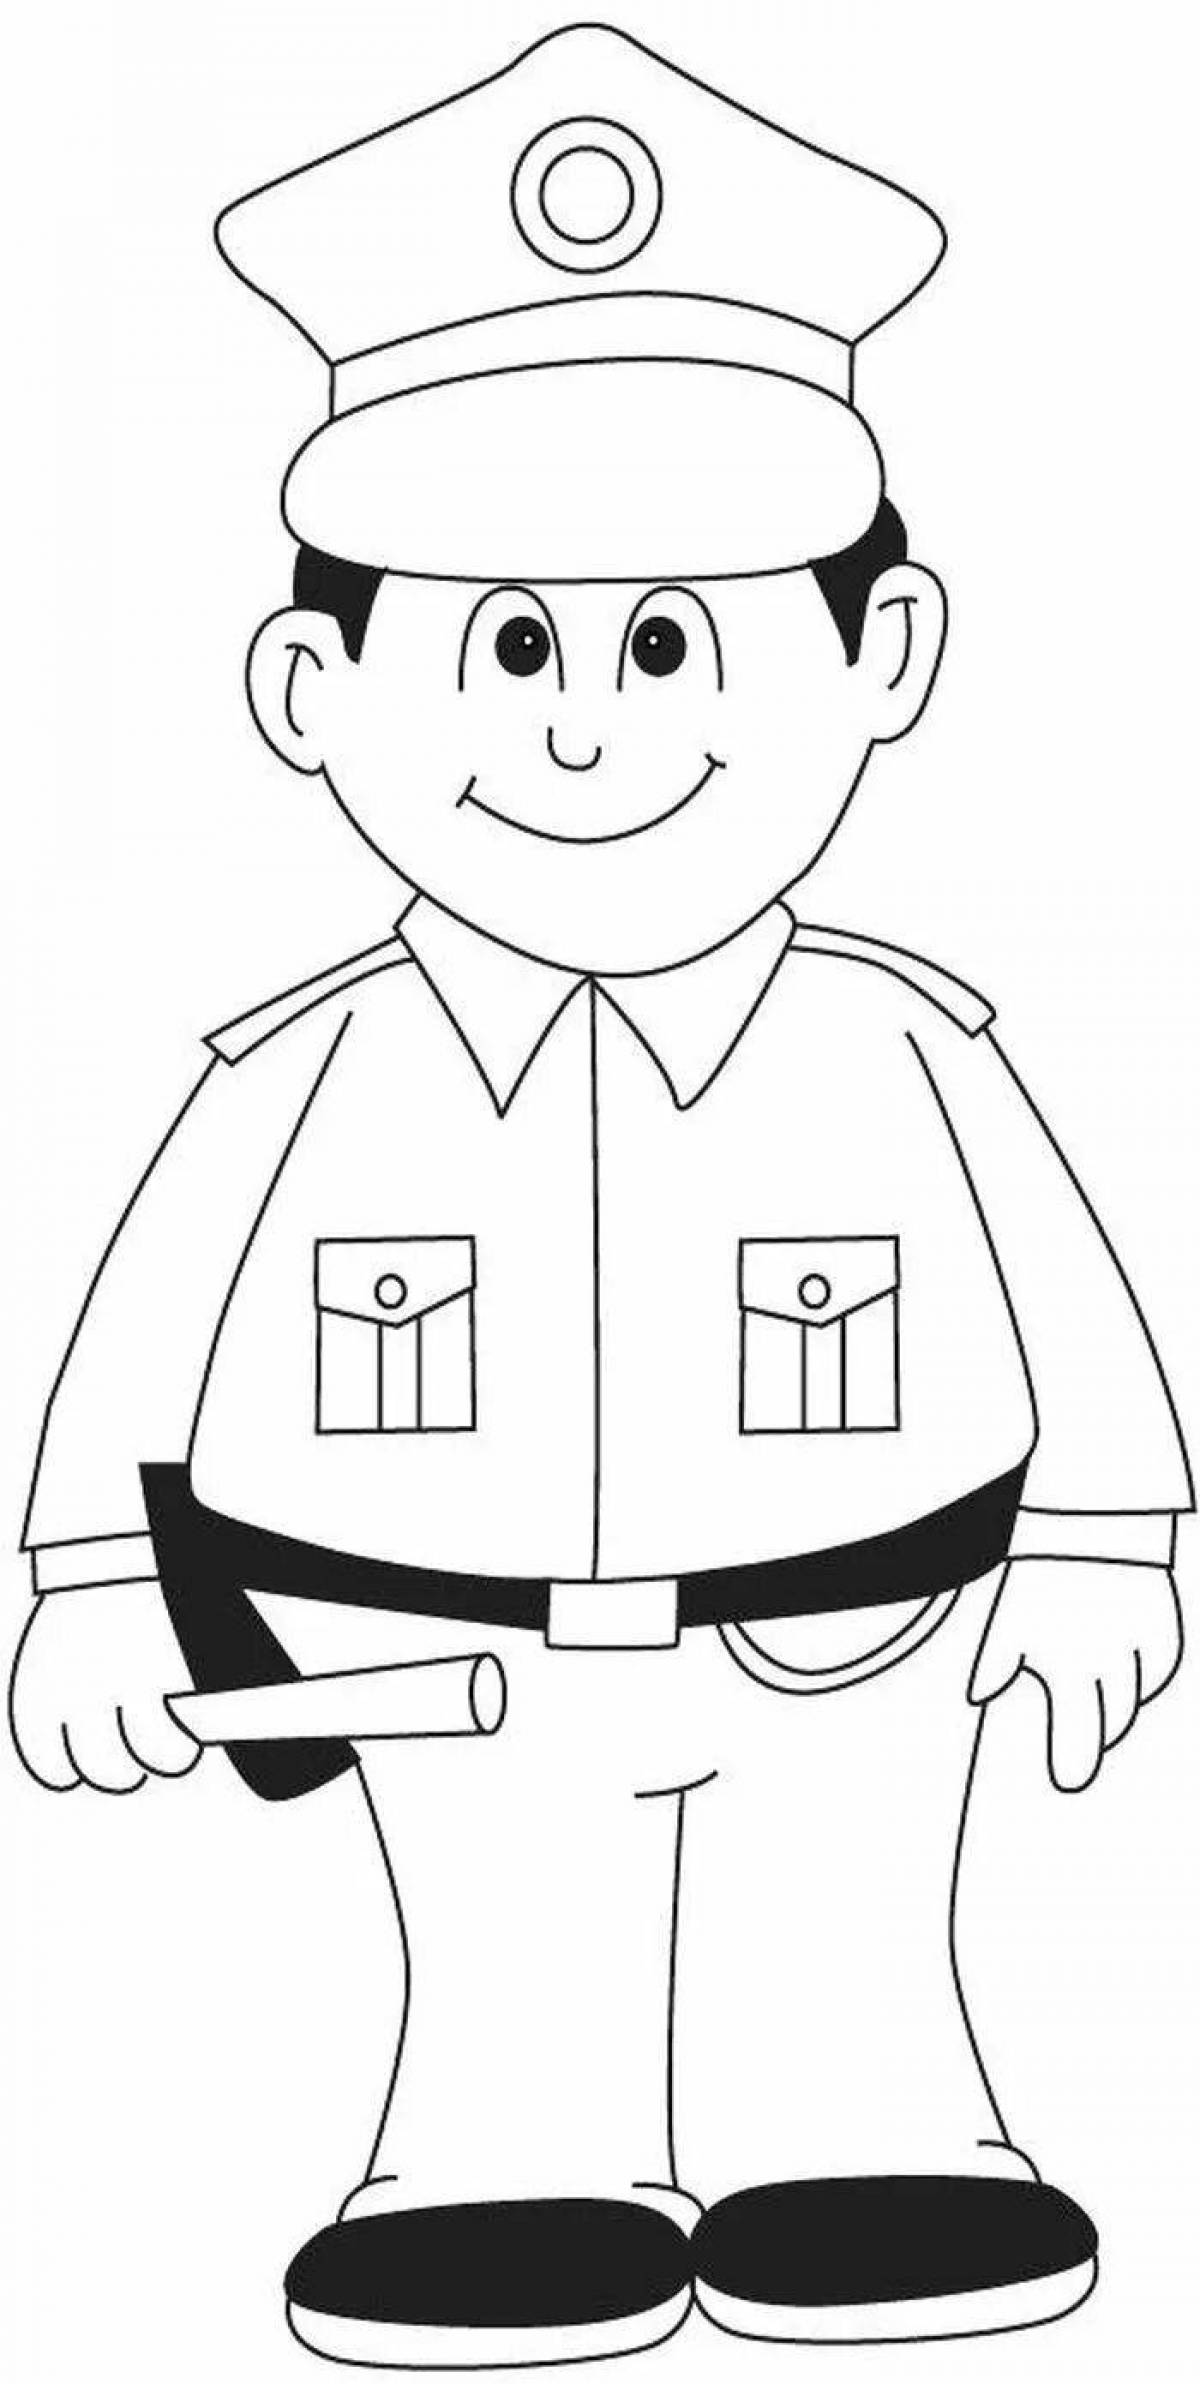 Animated traffic controller coloring page for toddlers